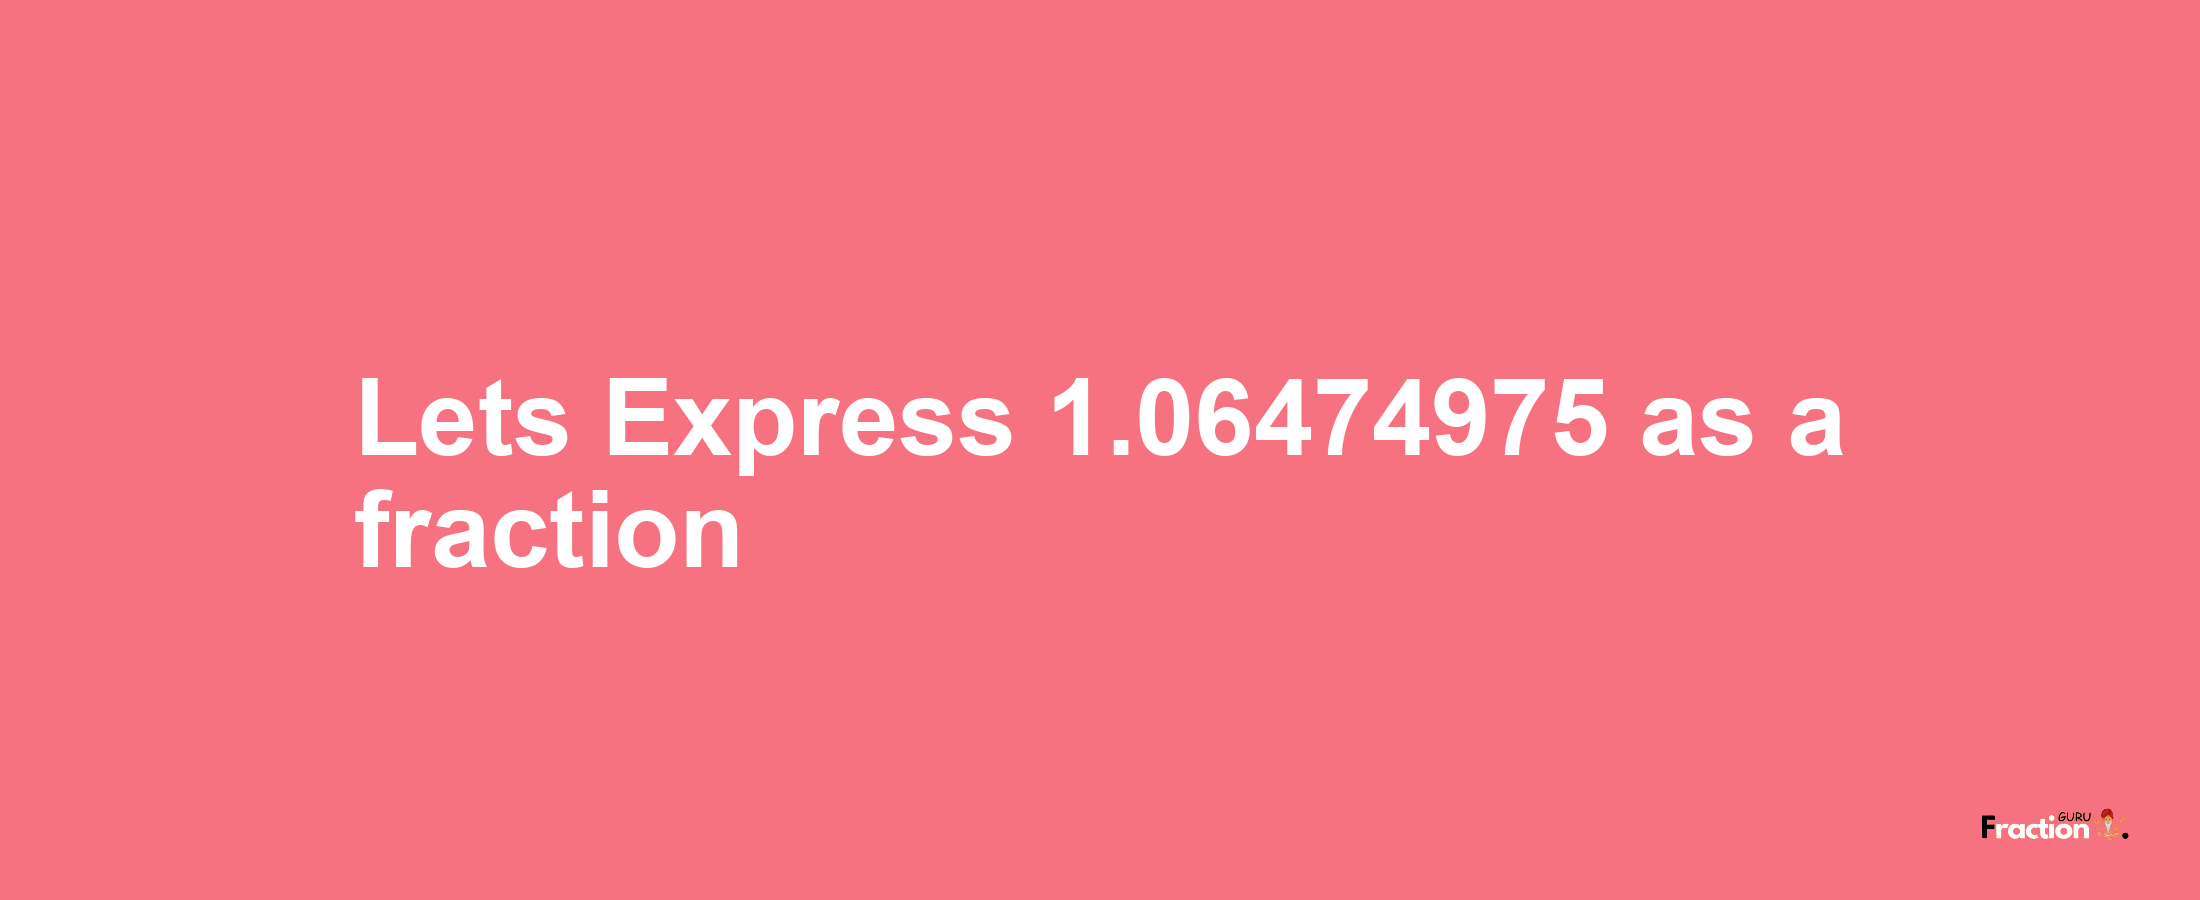 Lets Express 1.06474975 as afraction